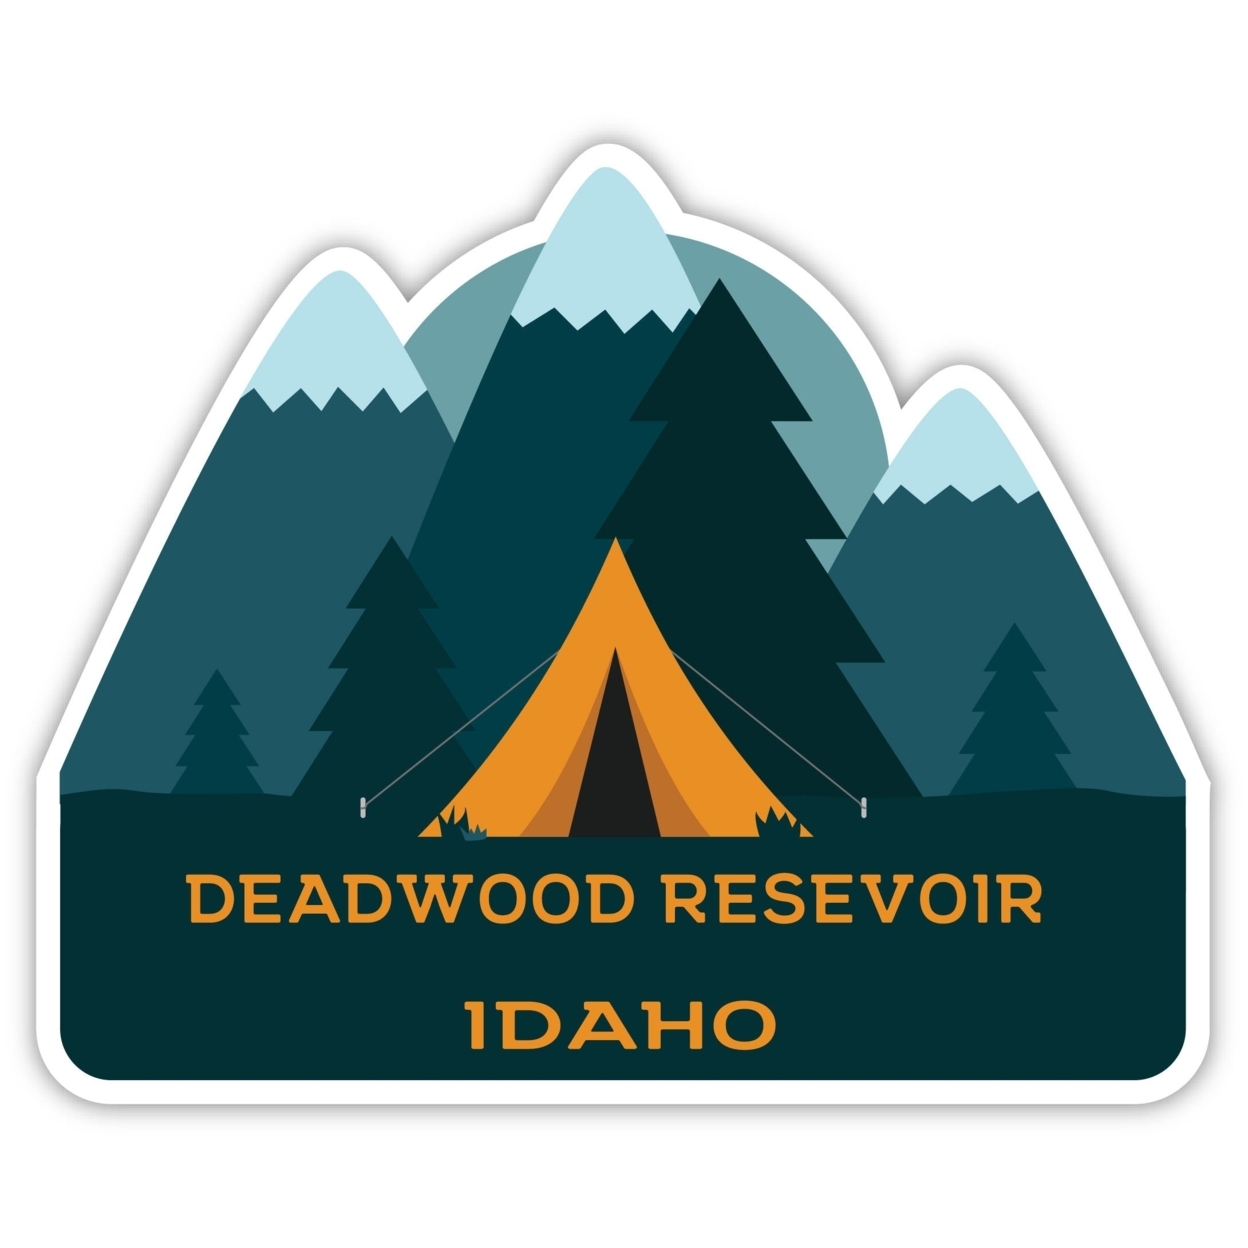 Deadwood Resevoir Idaho Souvenir Decorative Stickers (Choose Theme And Size) - 4-Pack, 8-Inch, Tent